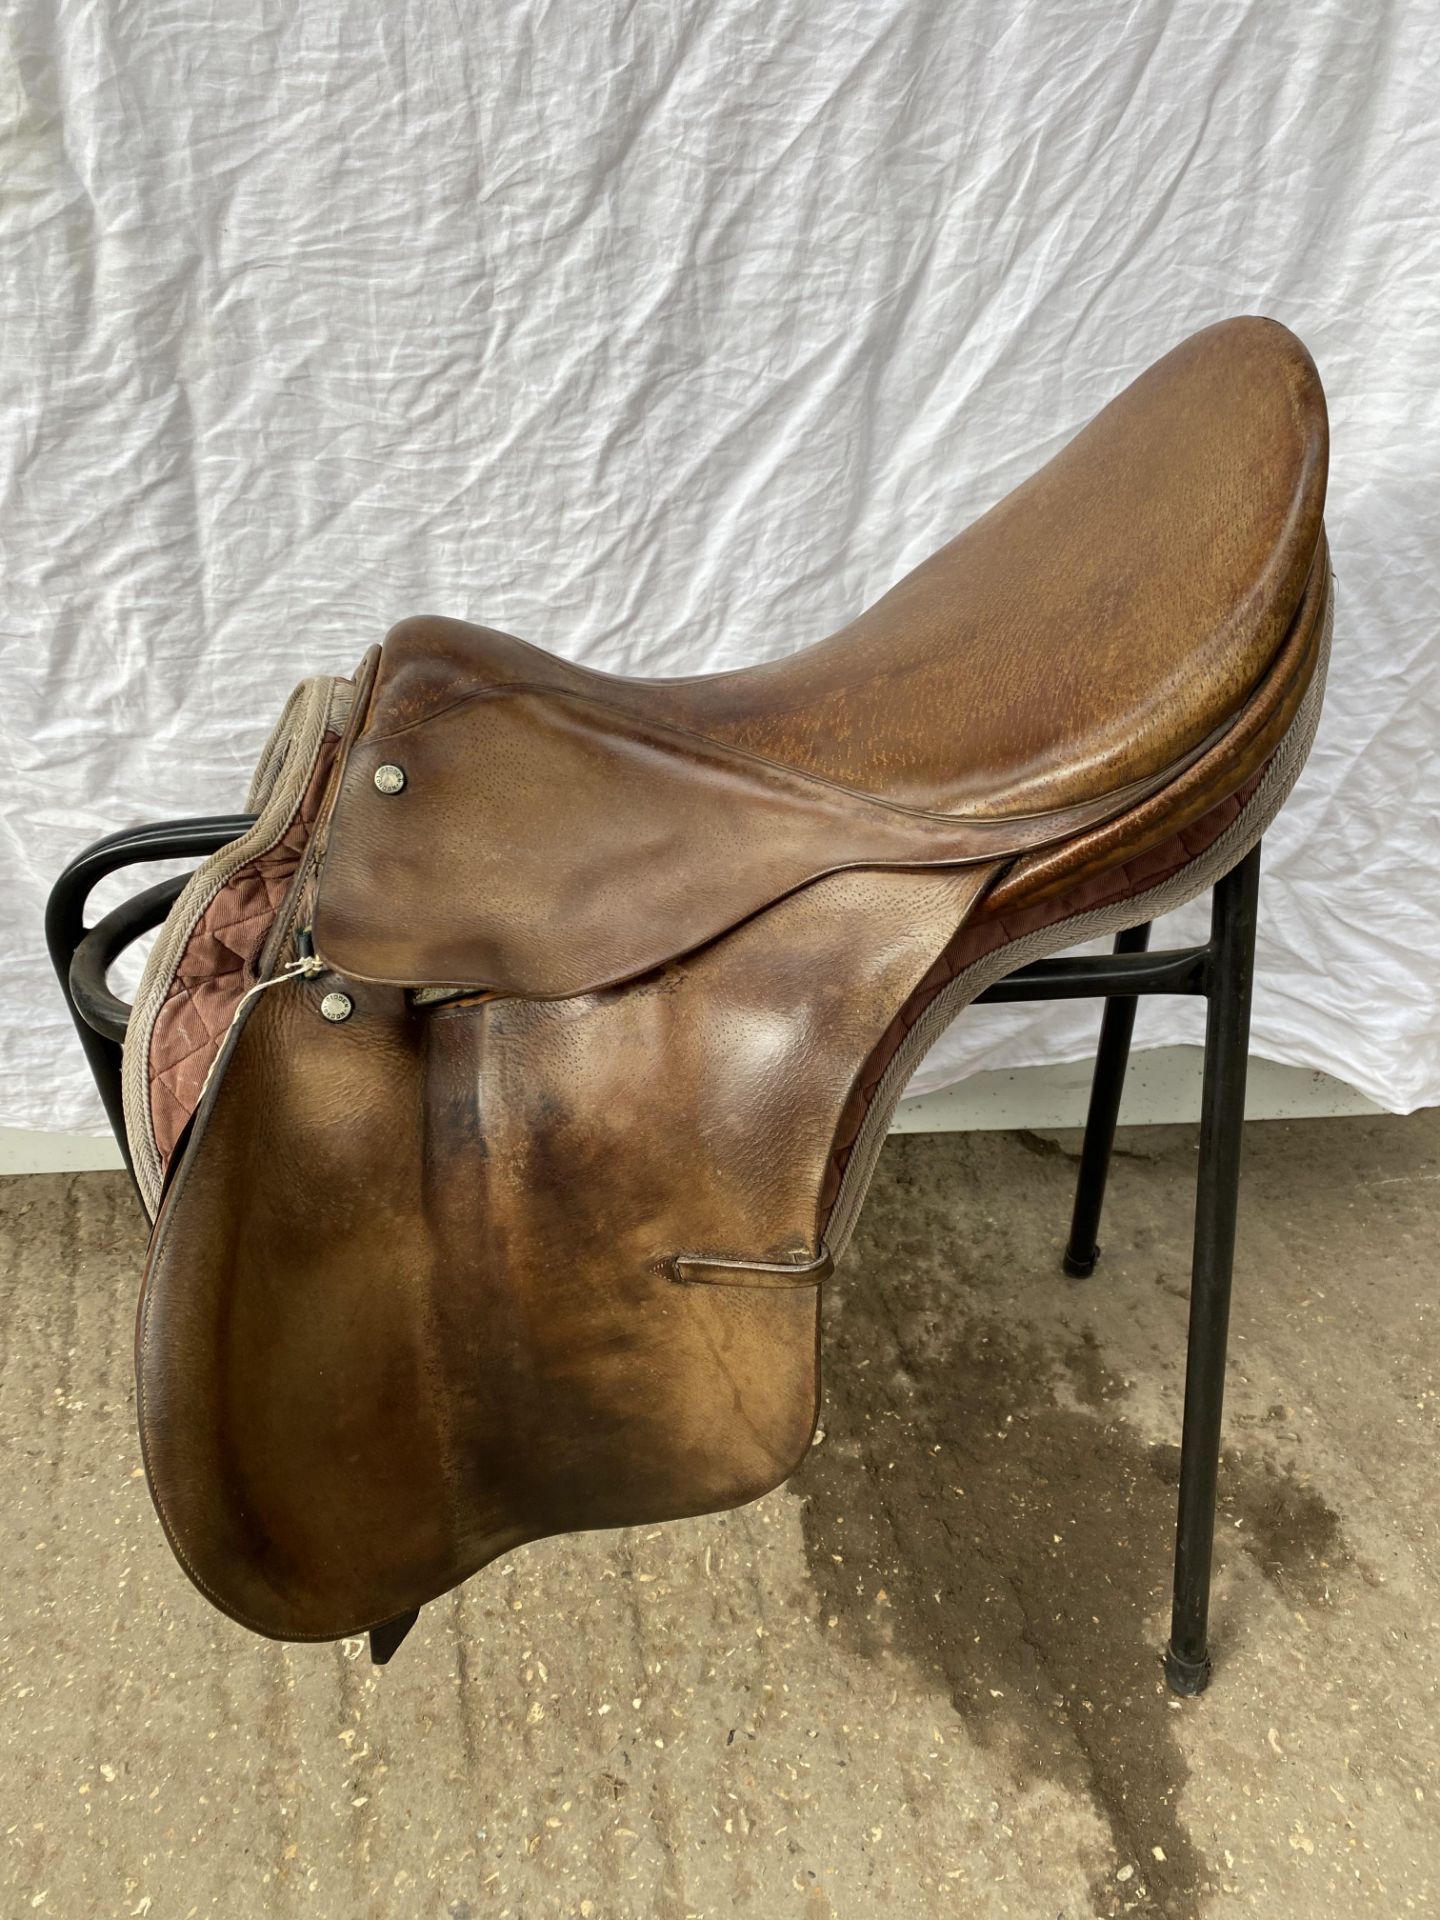 Giddens of London saddle 17", brown leather with numnah